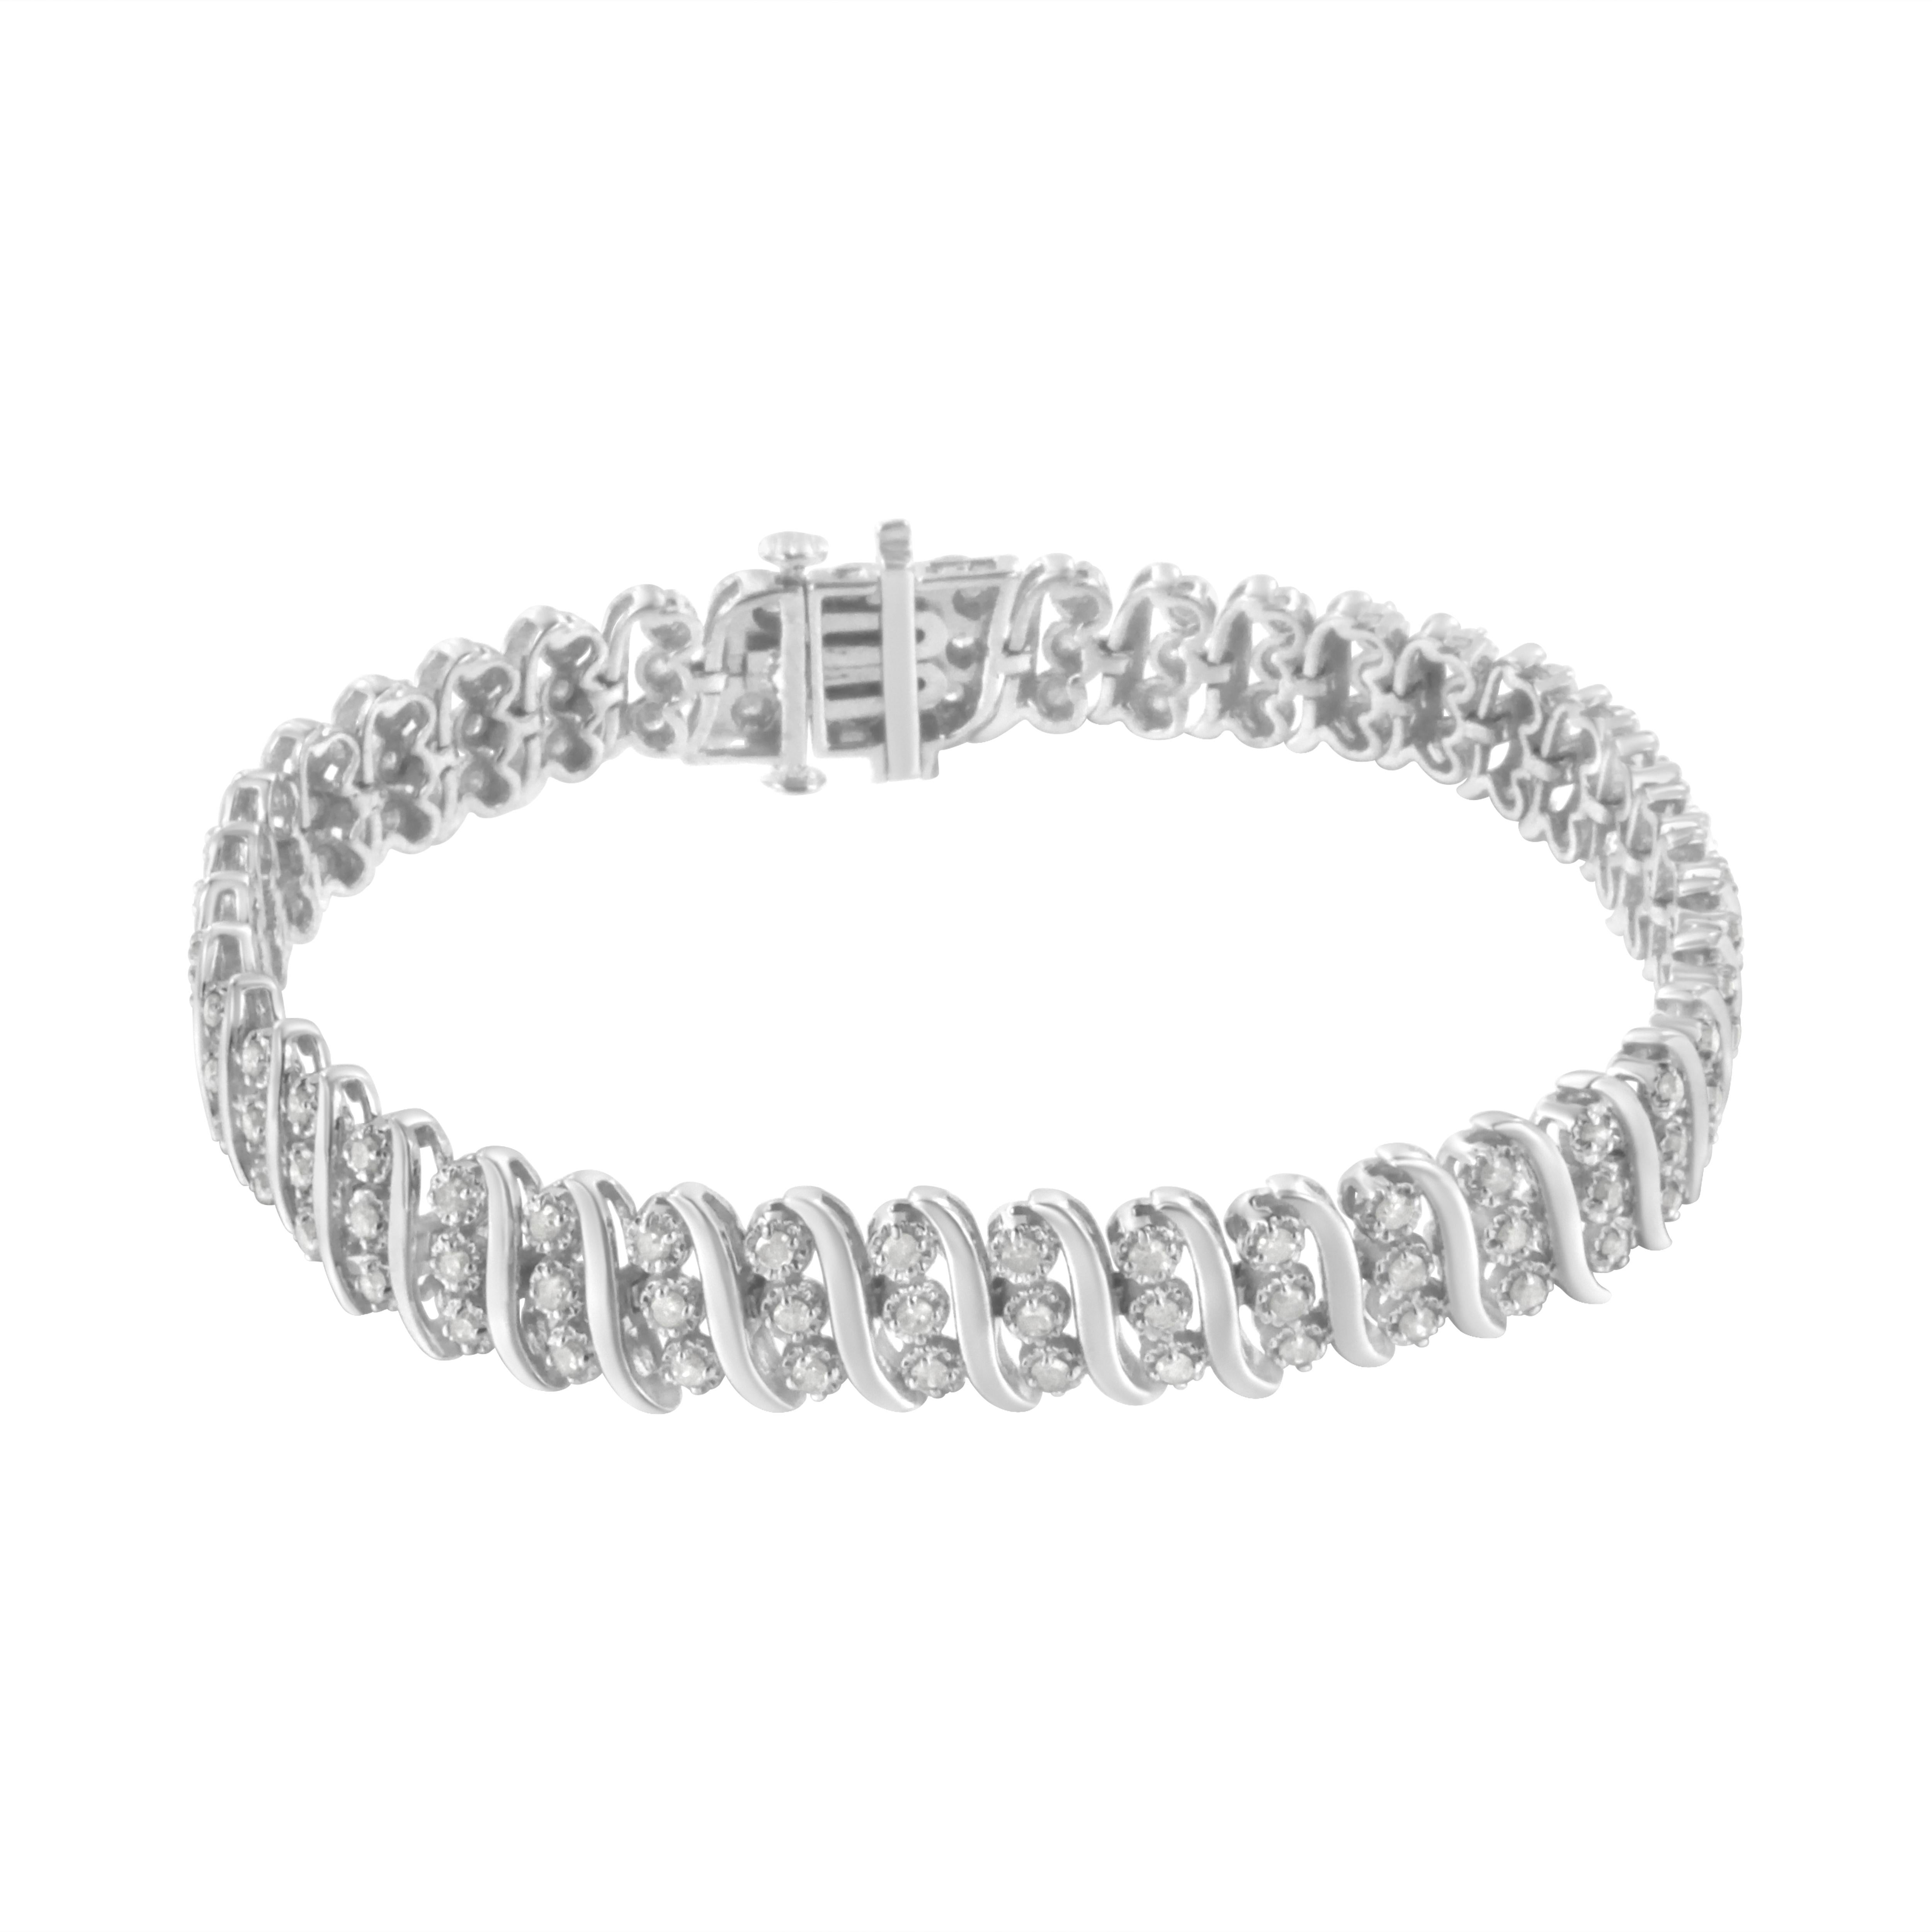 A gorgeous sterling silver double row diamond bracelet, perfect for your collection. This stunning piece has an alternating design of silver 